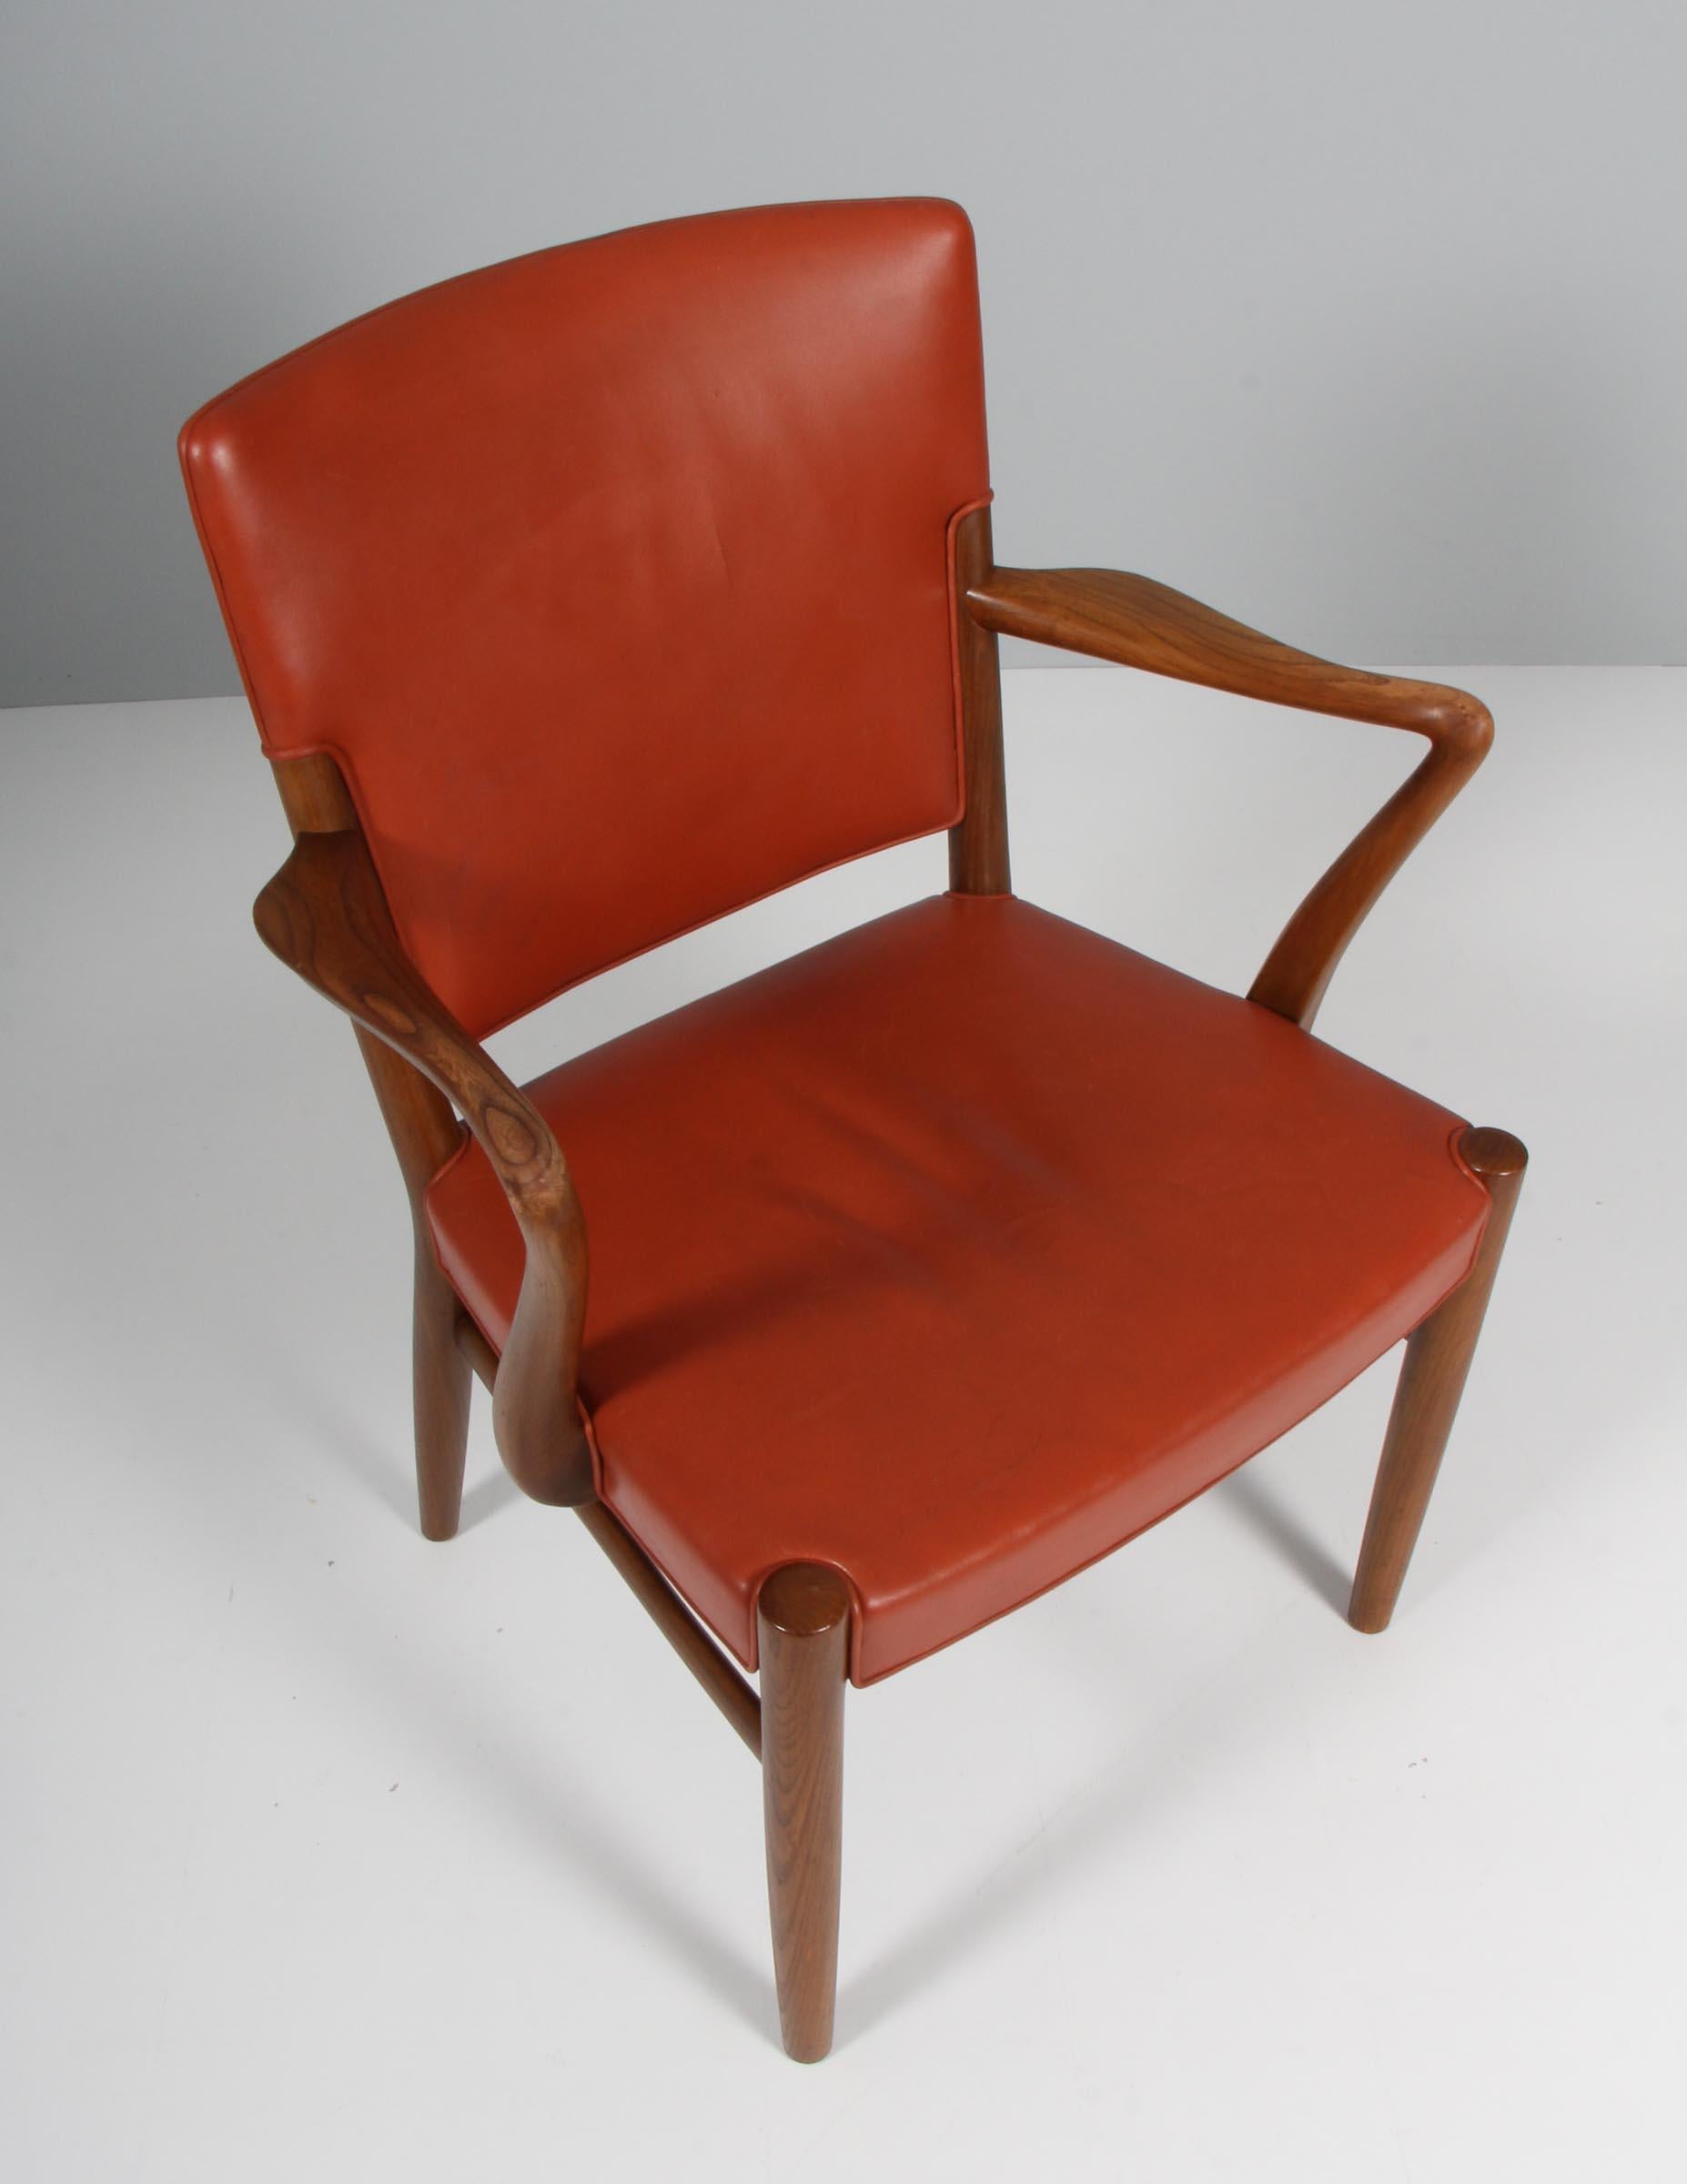 Ole Wanscher, attributed. armchair with frame of nutwood.

Original upholstered with brown patinated leather.

Attributed to Fritz Hansen.